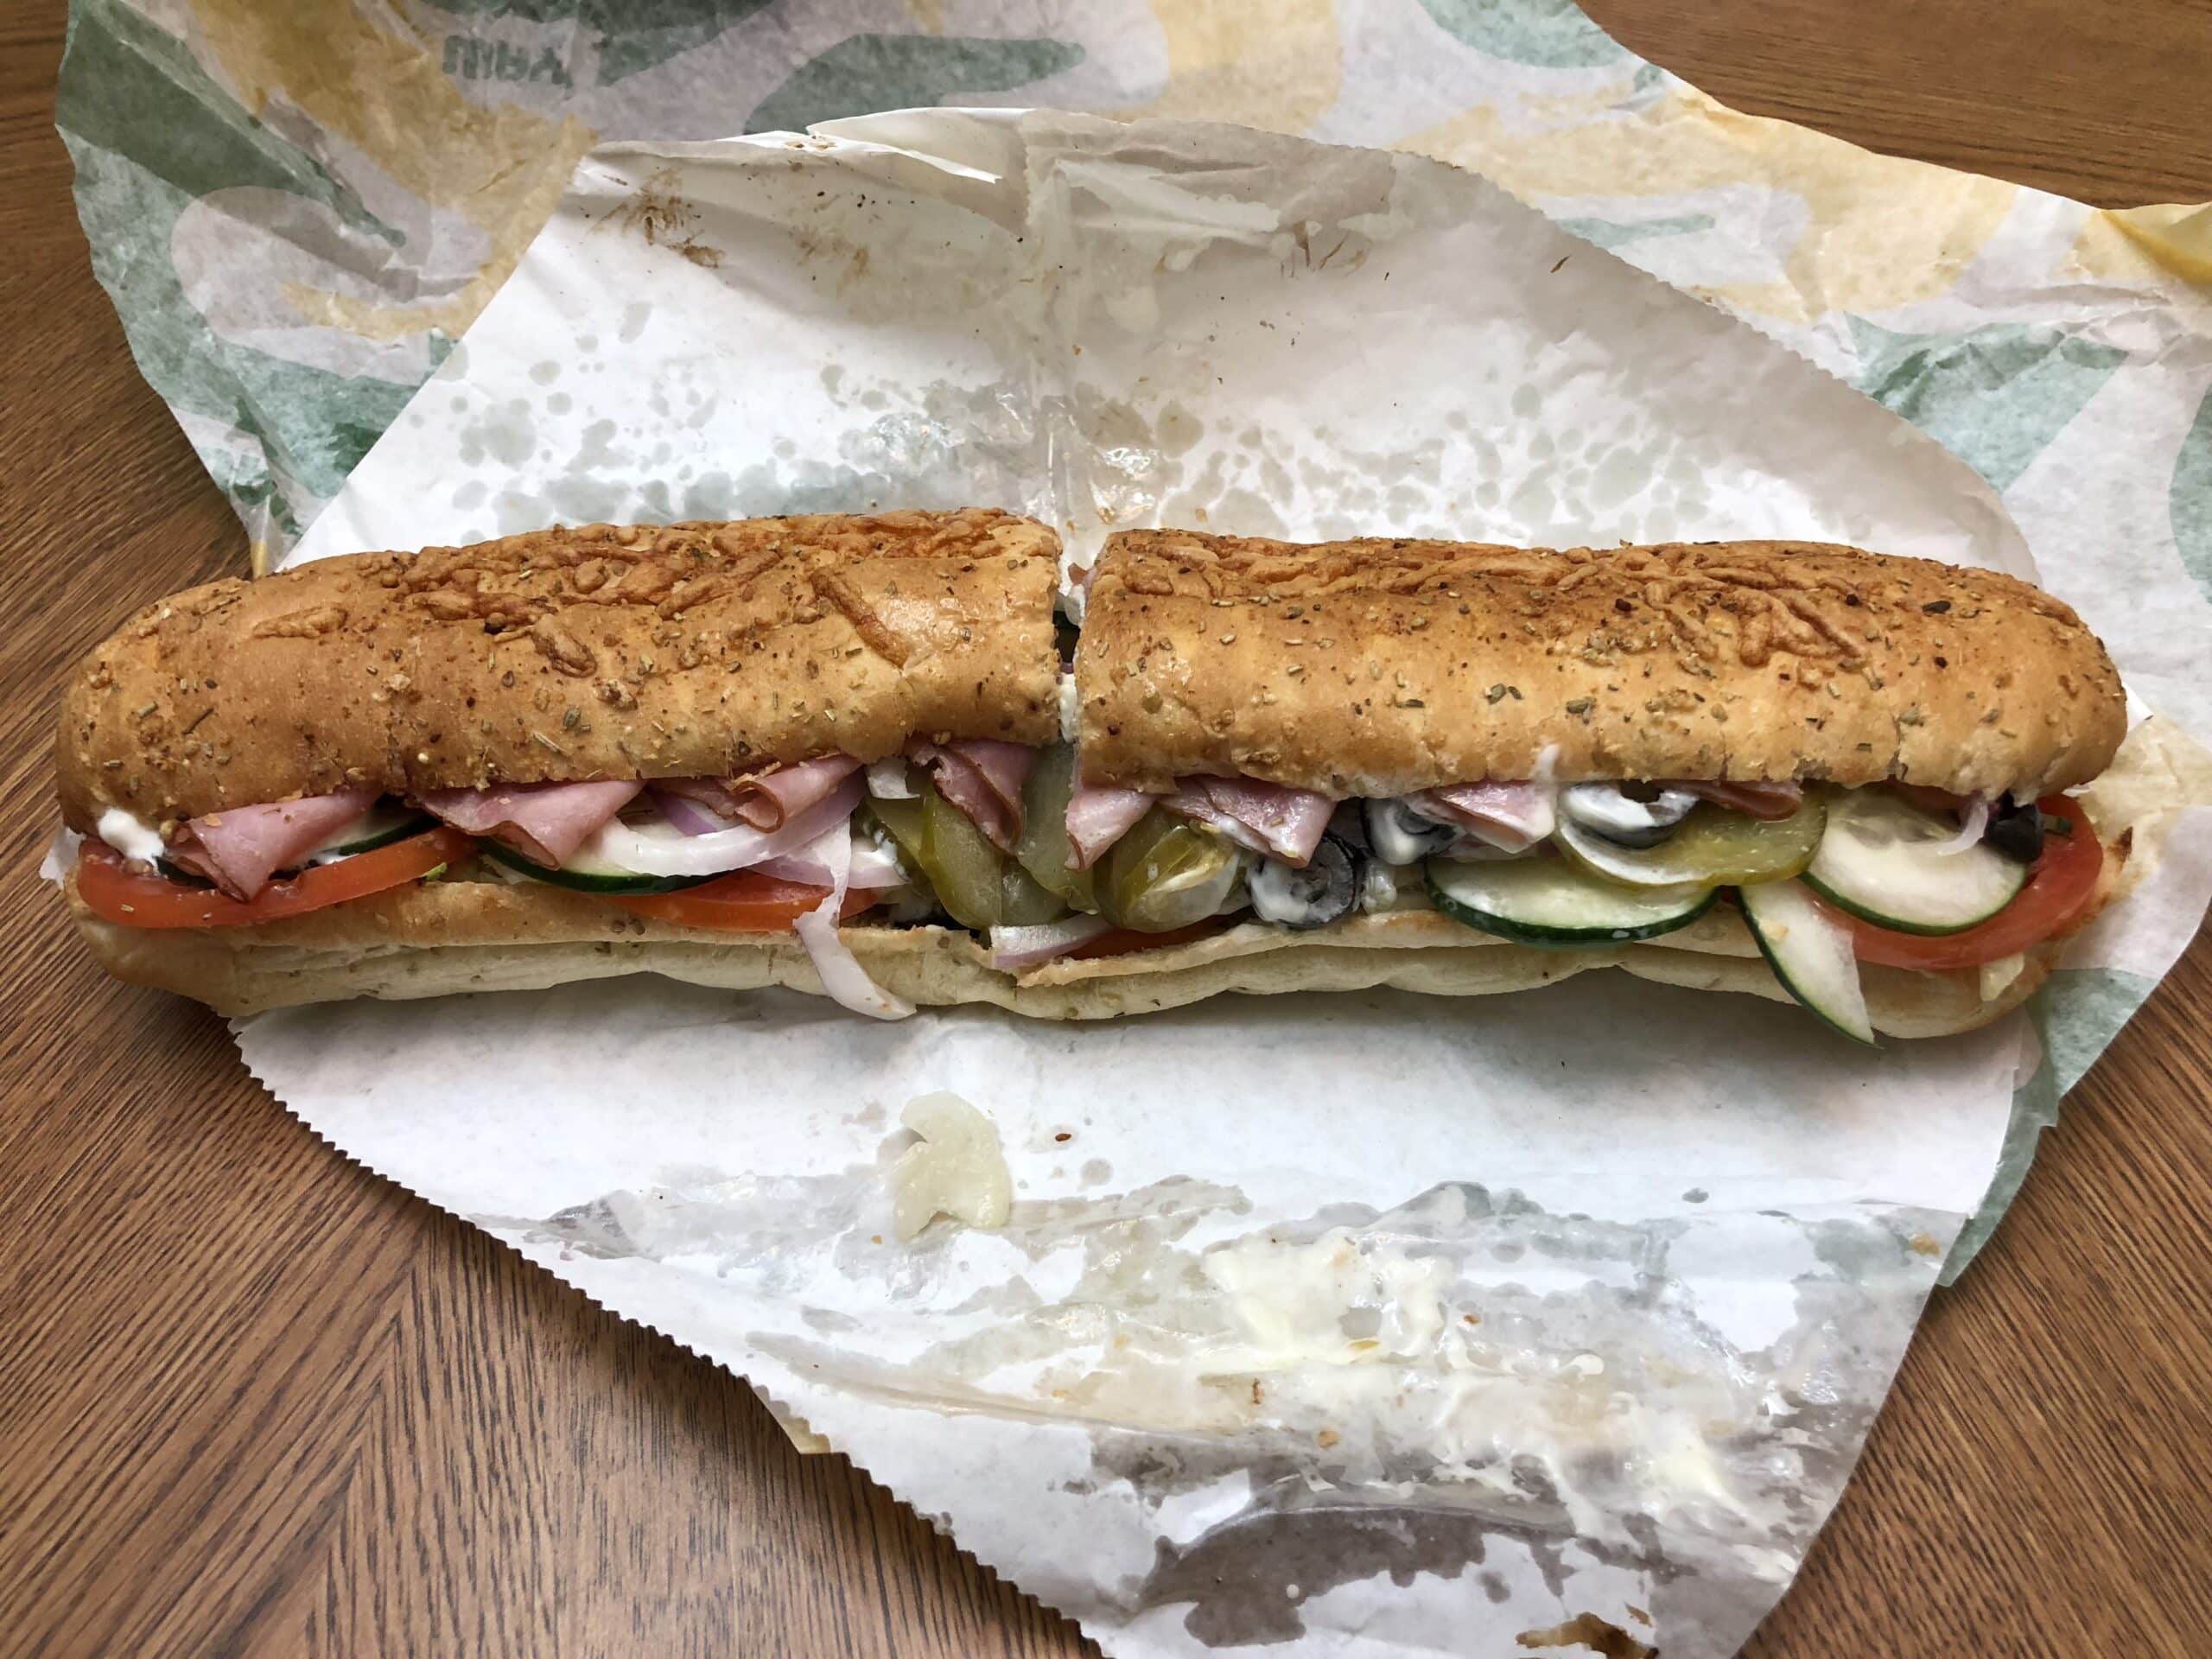 How Much is a Footlong from Subway? How To Customize It